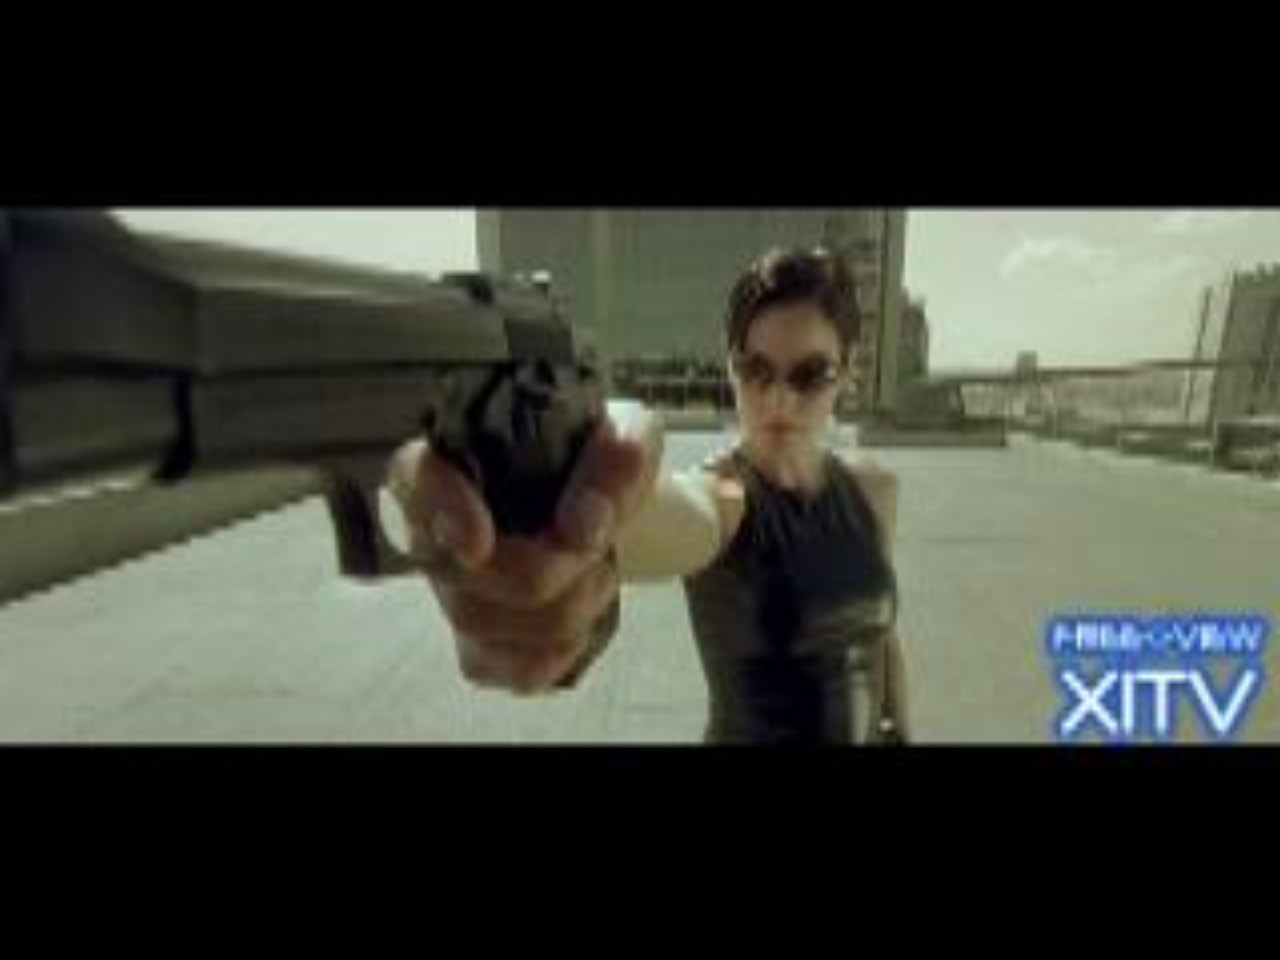 Watch Now! XITV FREE <> VIEW THE MATRIX! XITV Is Must See TV! 